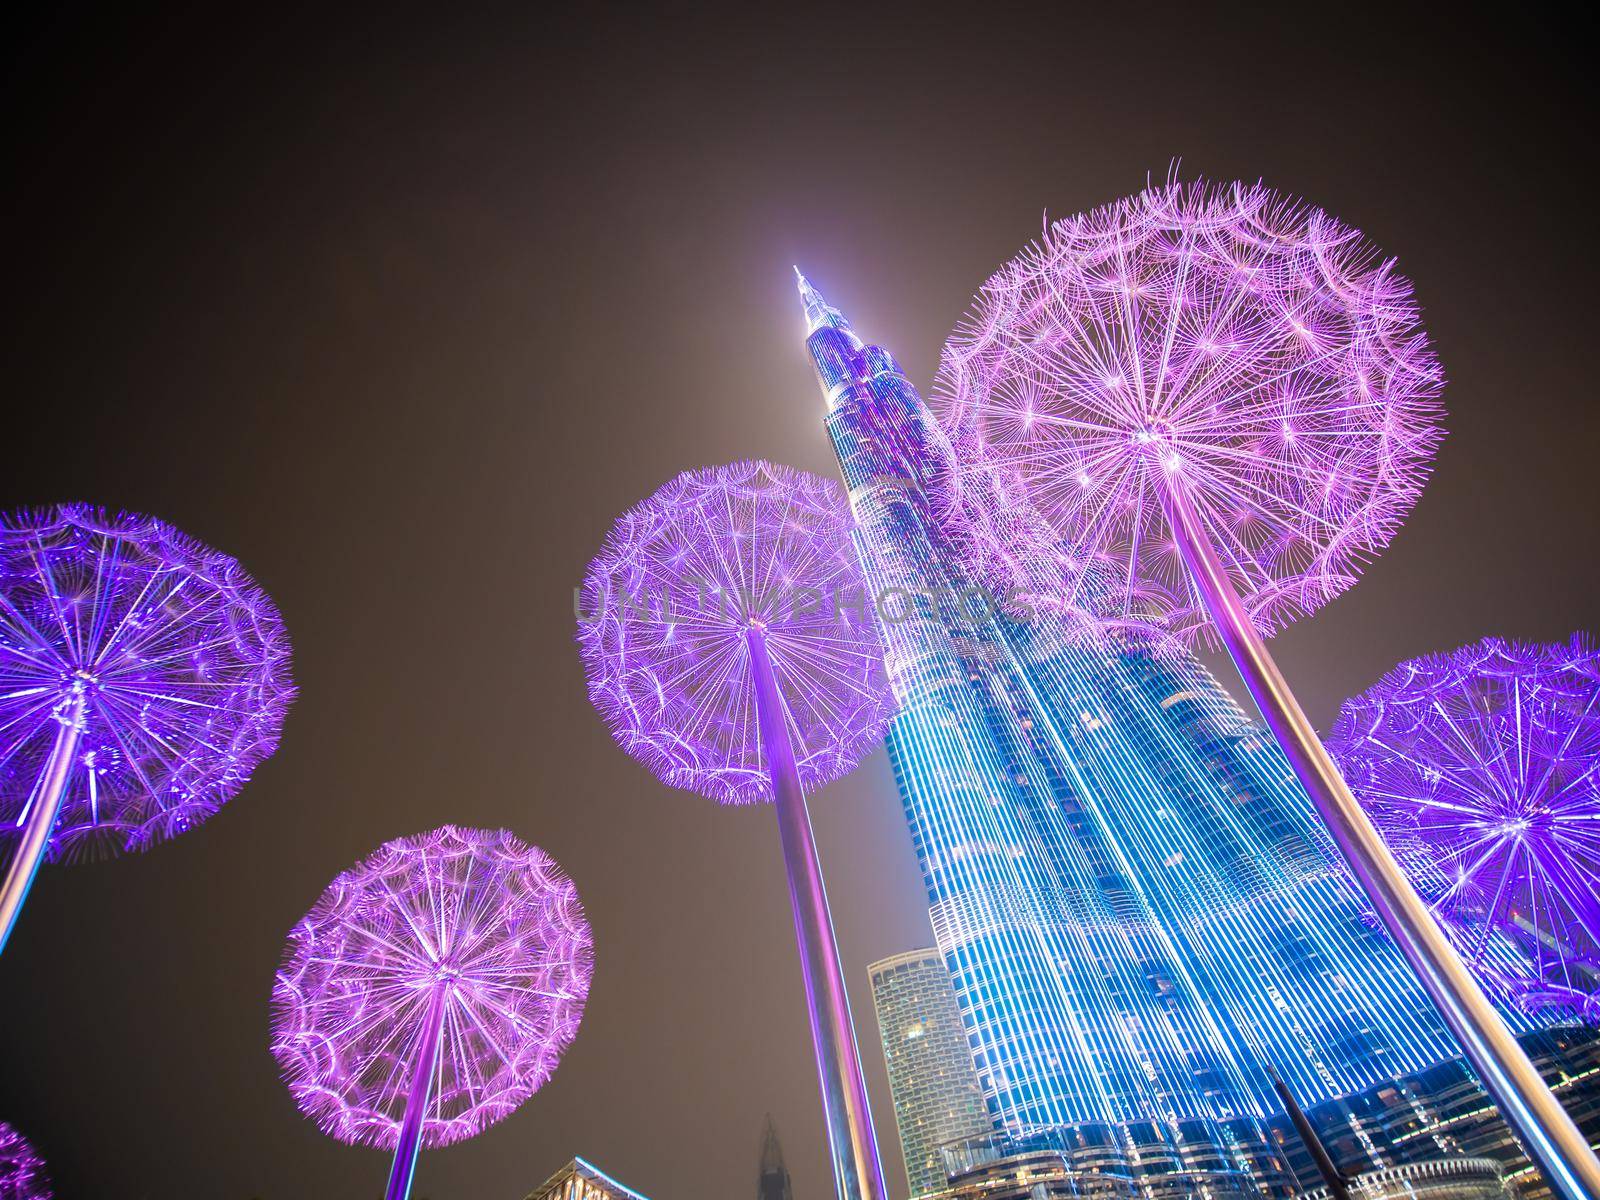 Dubai, UAE - May 15, 2018: Burj Khalifa in the late evening against the background of luminous dandelions. by DovidPro